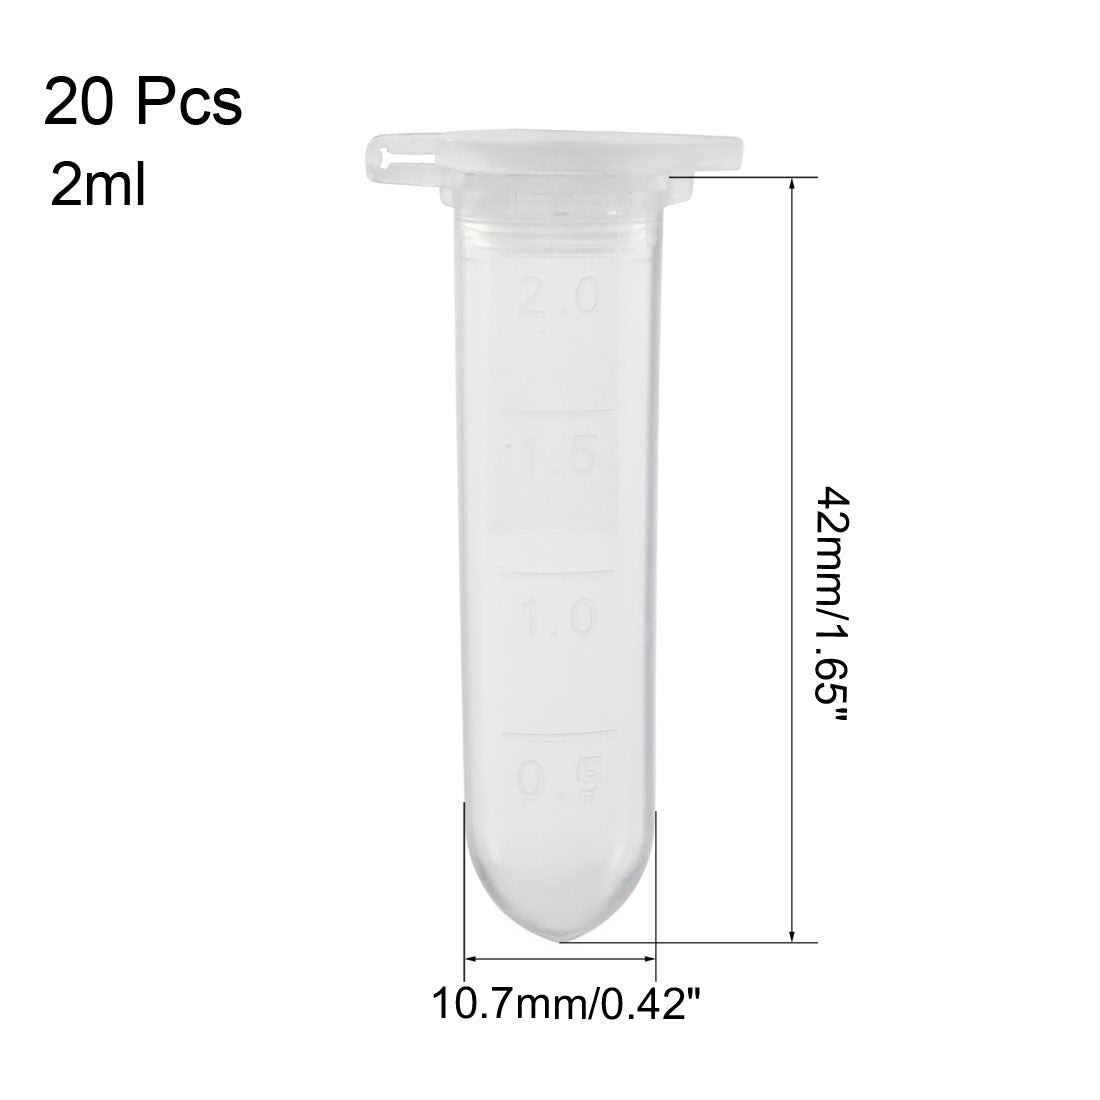 uxcell Uxcell 20 Pcs 2ml Plastic Centrifuge Tubes with Attached Cap, Round Bottom, Graduated Marks